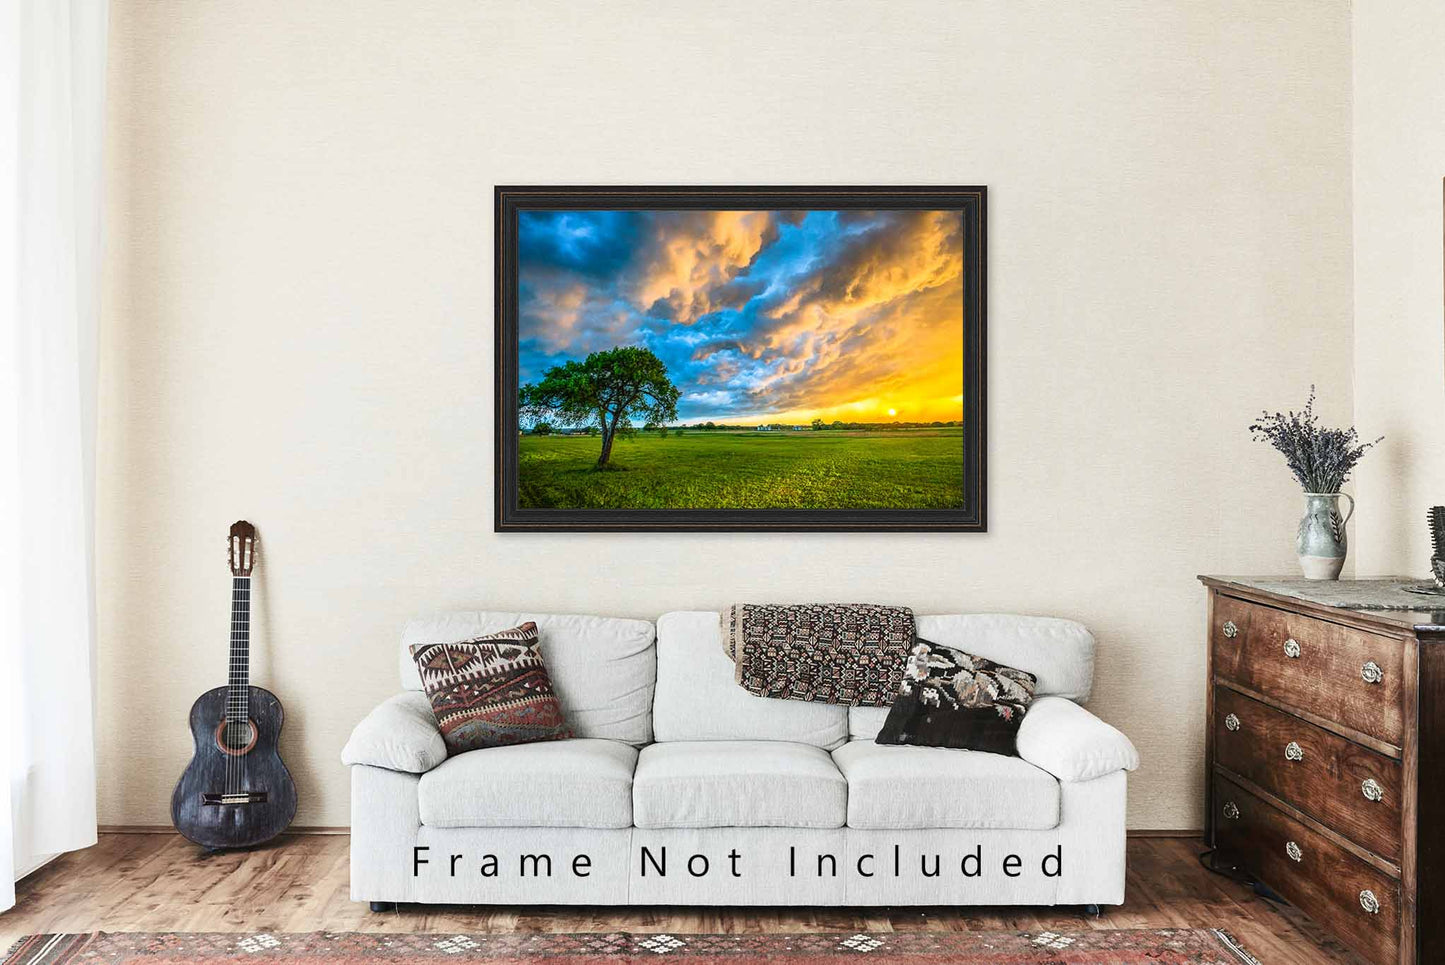 Cloud Photography Print - Picture of Storm Clouds Illuminated by Setting Sun Over Lone Tree in Northern Texas Scenic Sky Decor 4x6 to 40x60